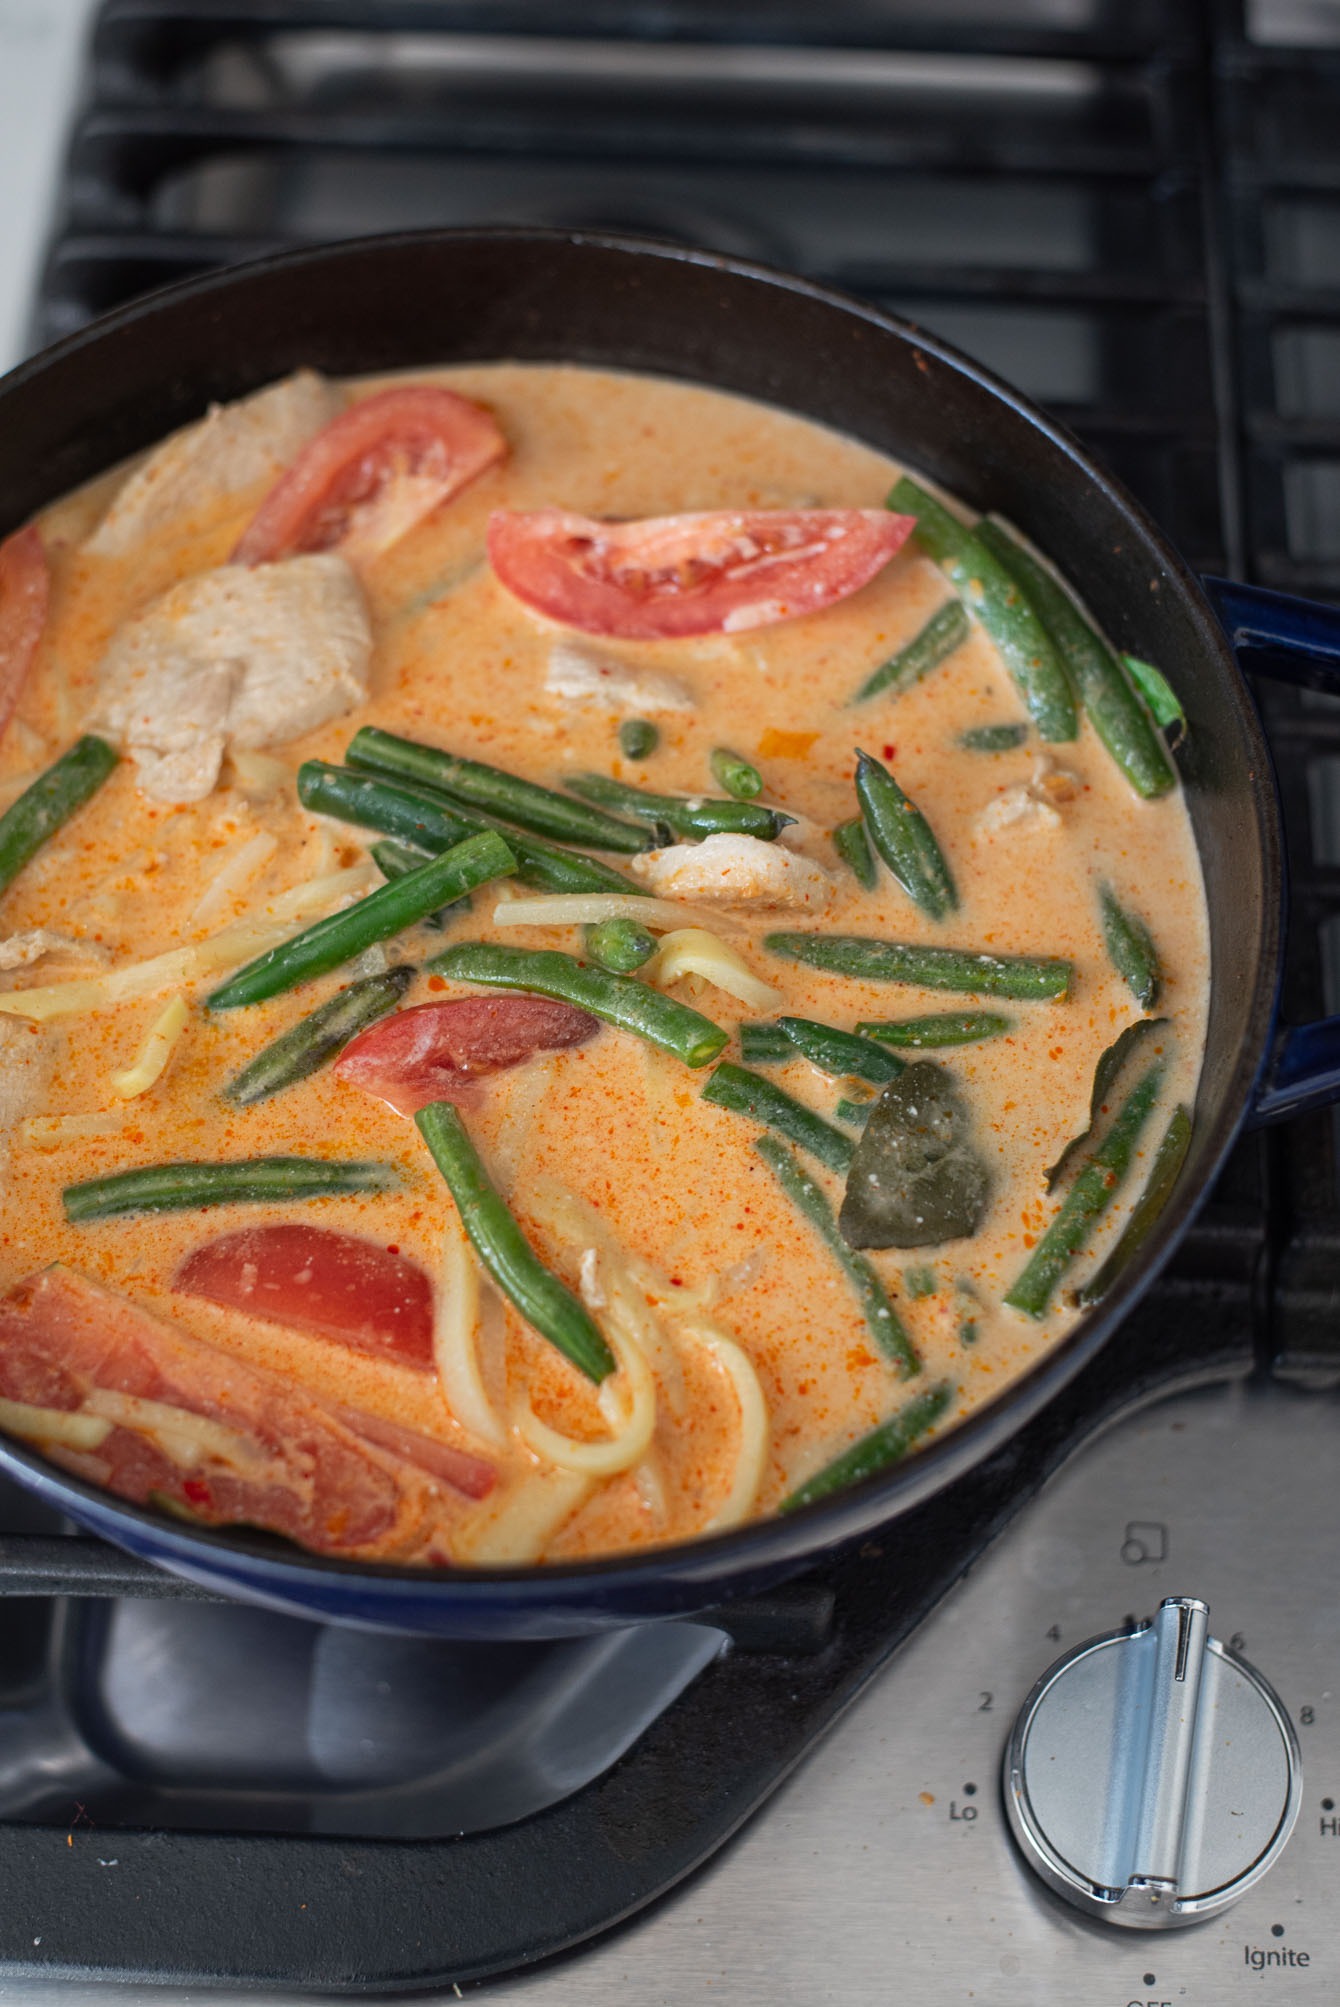 Coconut milk is added to Thai red curry chicken and vegetables in a pot.